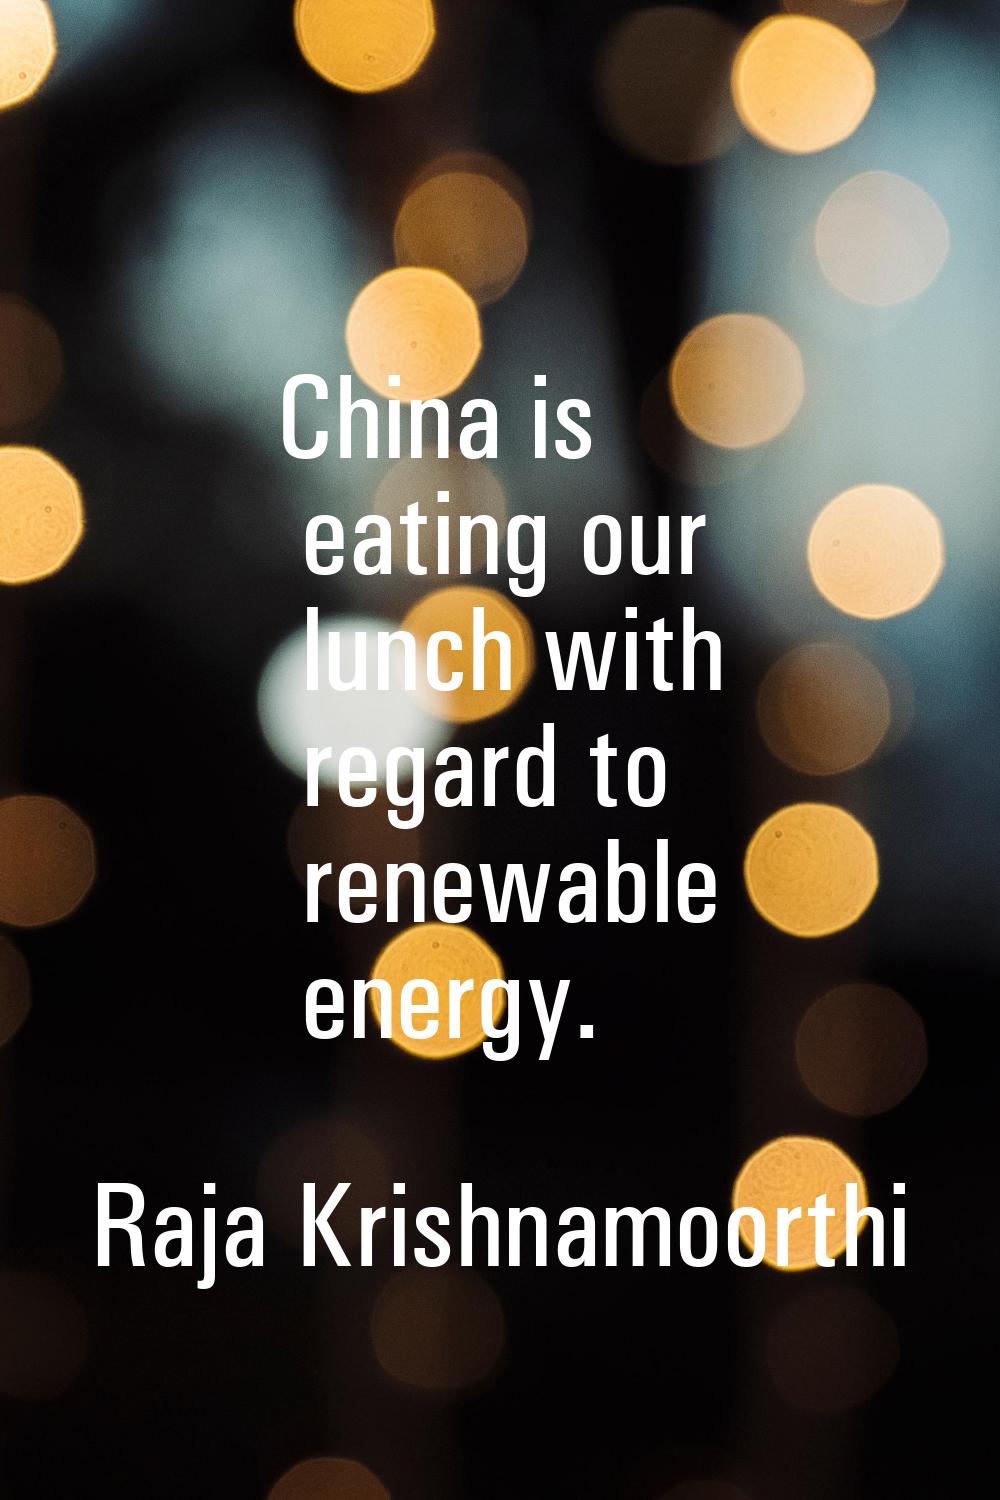 China is eating our lunch with regard to renewable energy.